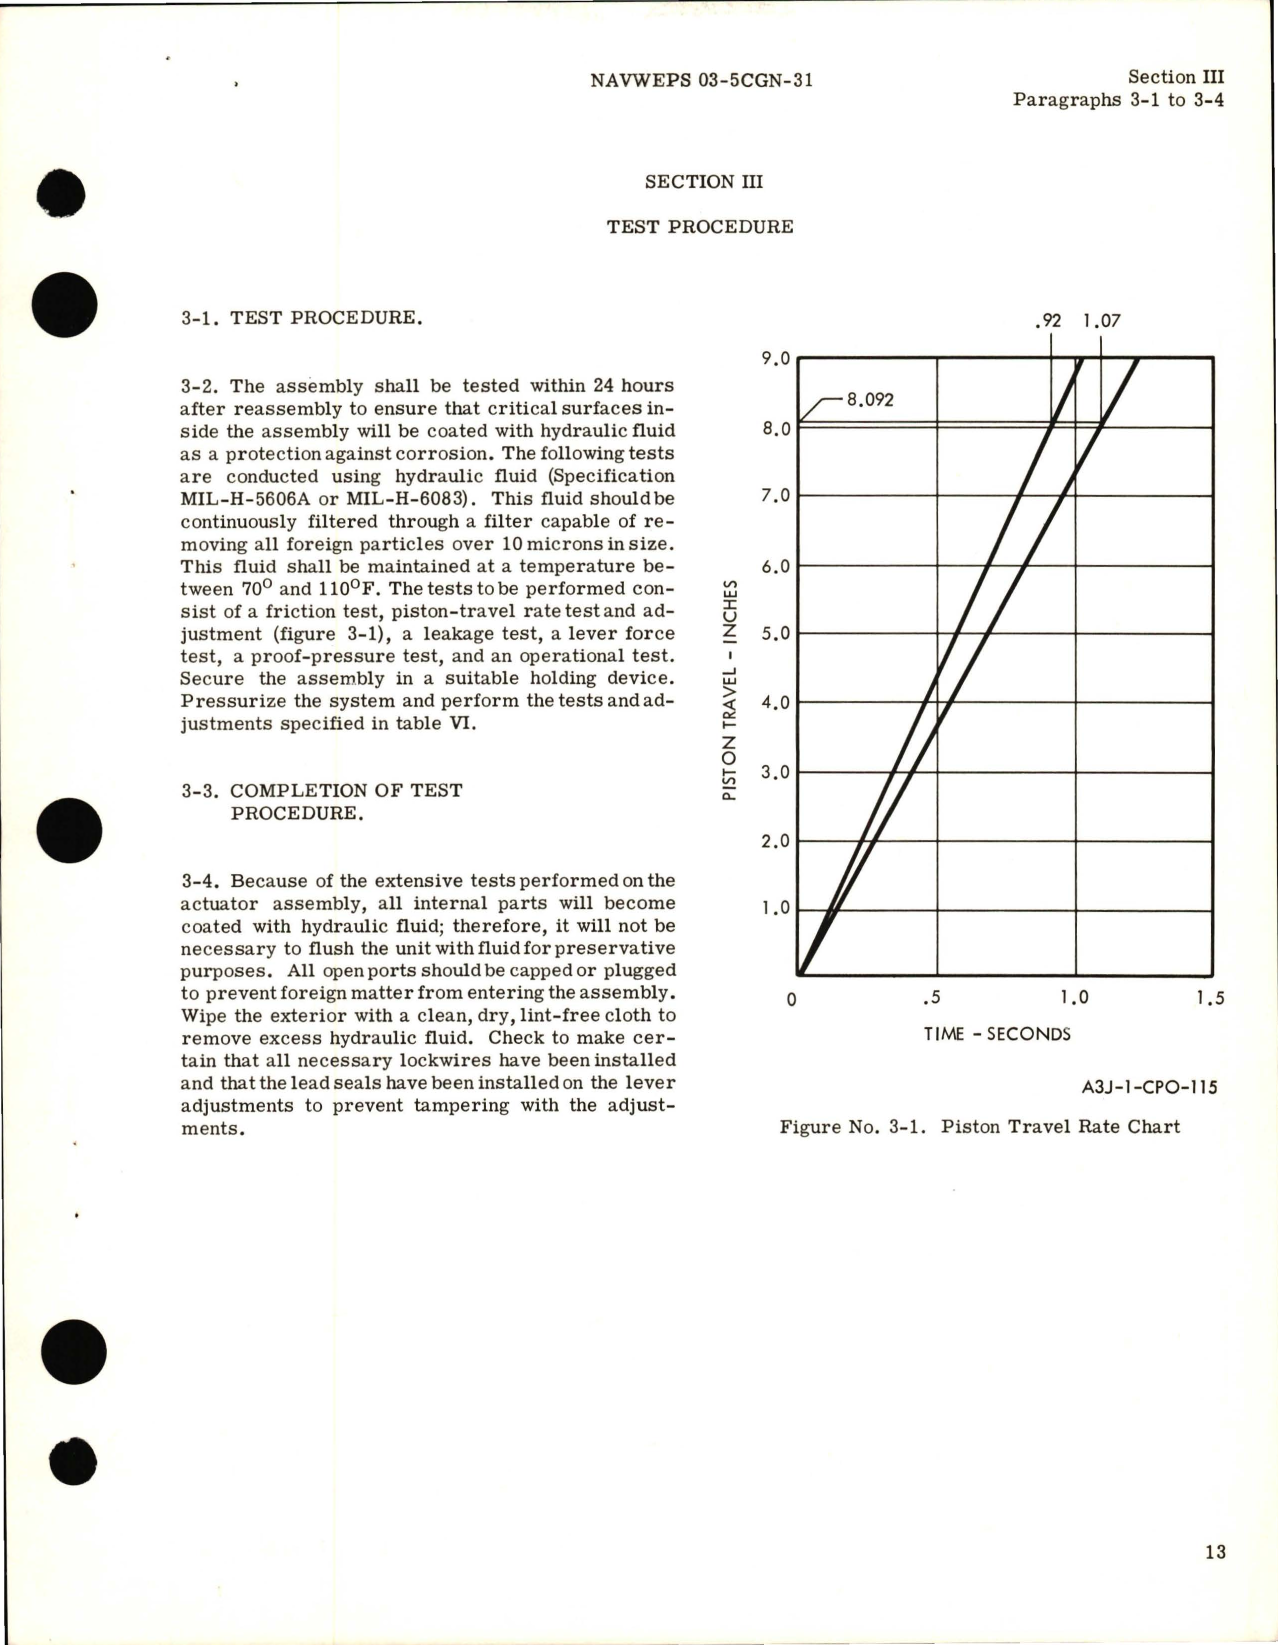 Sample page 7 from AirCorps Library document: Overhaul Instructions for Hydraulic Flight Control, Directional Stabilizer Actuator Assembly - Part 247-58711-11 and 247-58711-21 